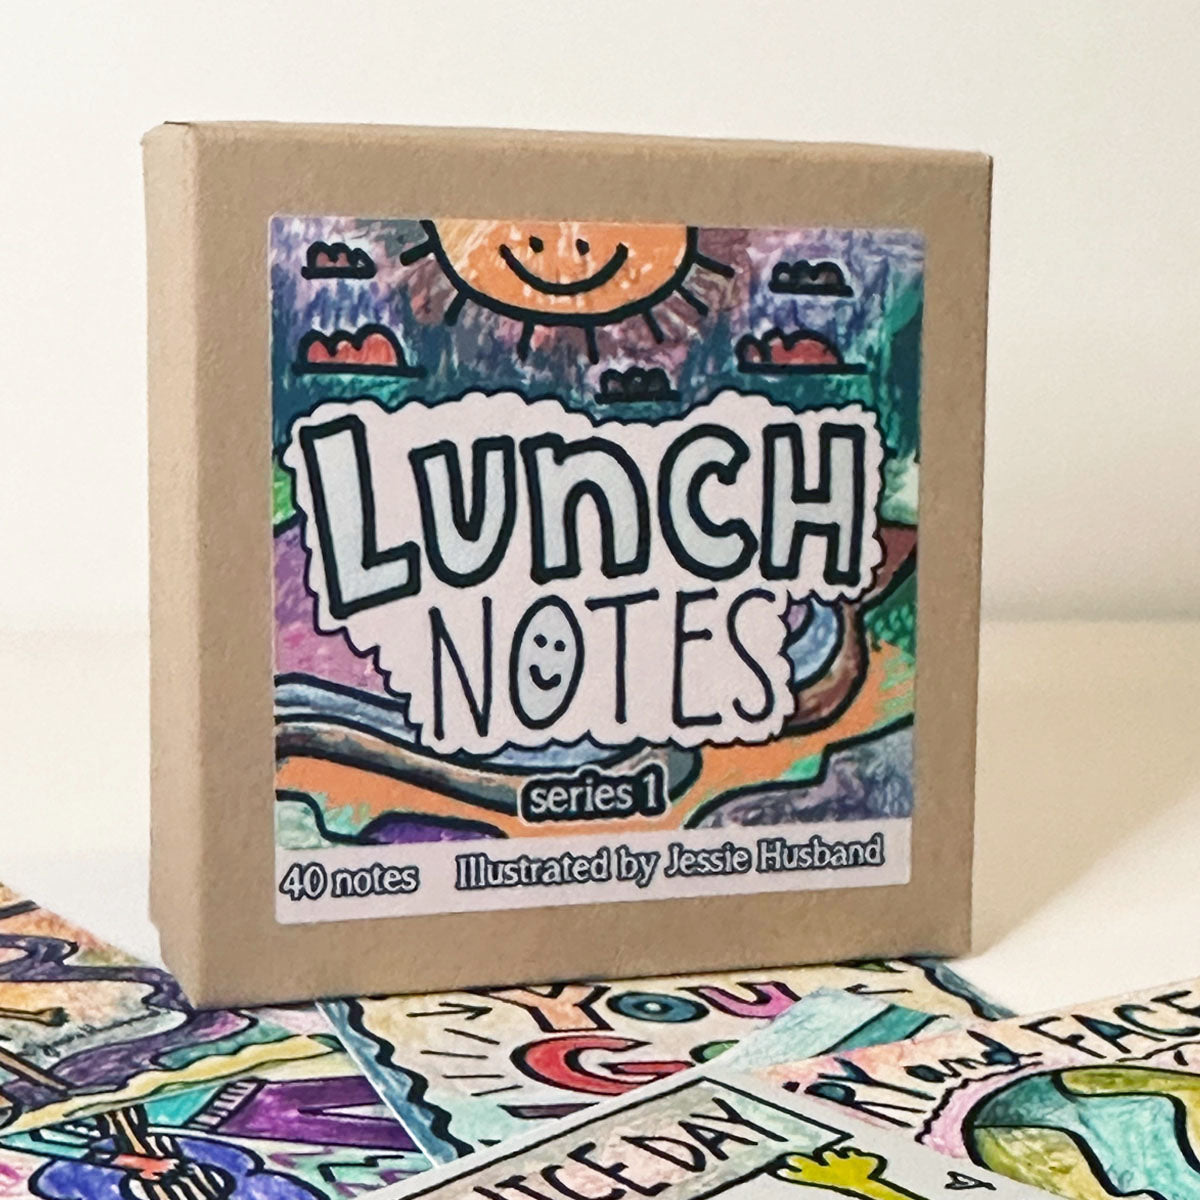 Lunch notes - Series 1